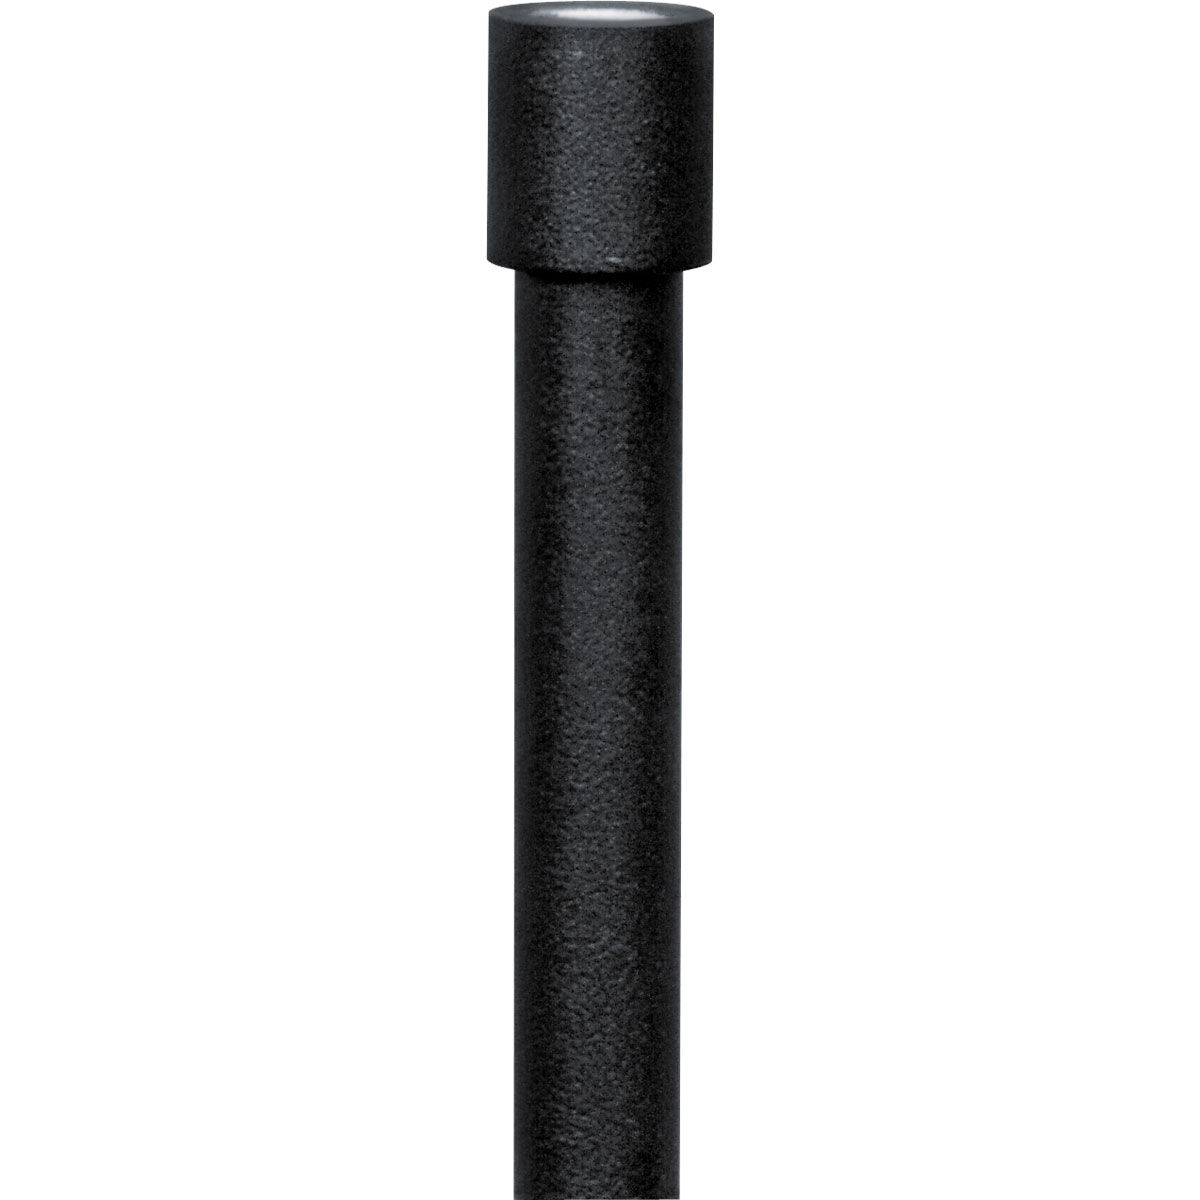 Make outdoor lighting simple with this Process Lighting mounting stem. The sturdy stalk holds up to wear and tear, while the rich green color blends easily with grass and surrounding greenery. Mounting stems with 1/2 inch NPS threads. Black finish.